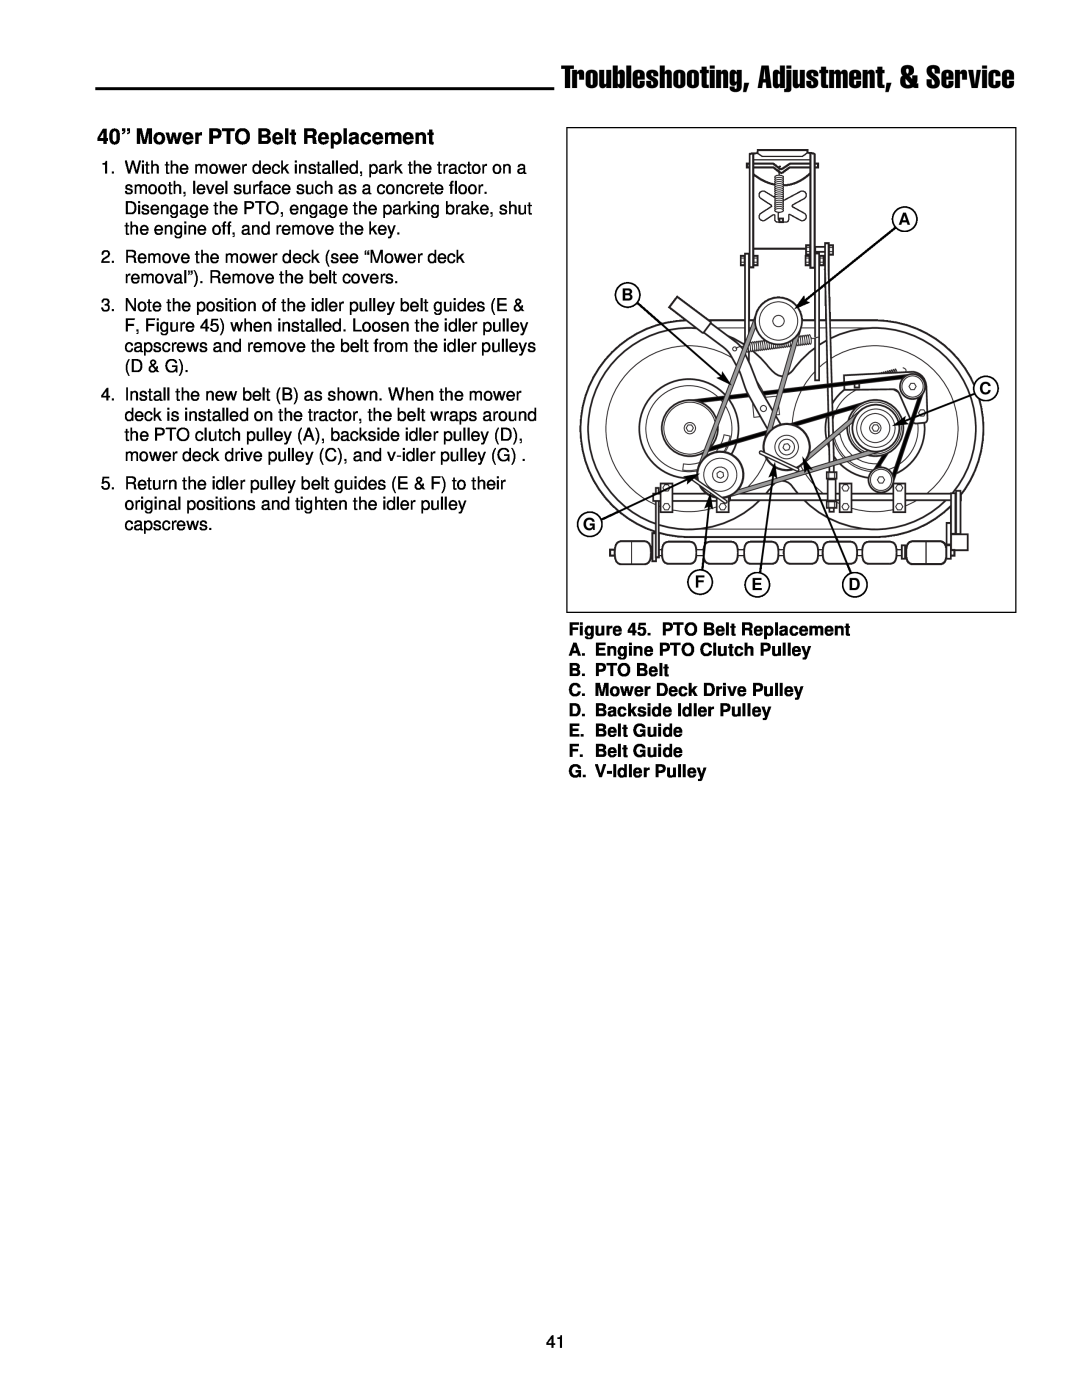 Simplicity 300 Series manual Troubleshooting, Adjustment, & Service, 40” Mower PTO Belt Replacement 